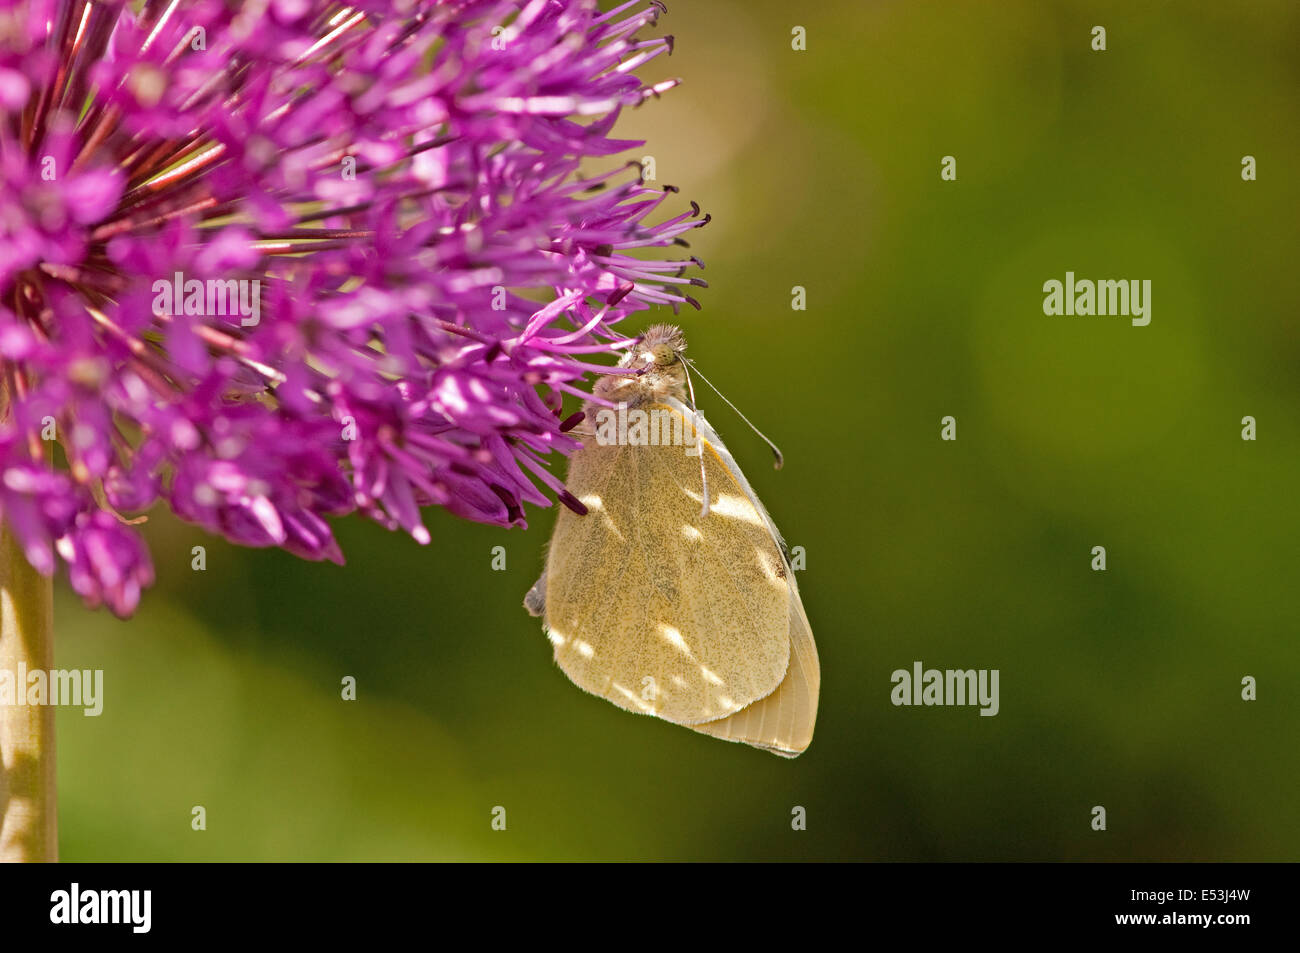 Small White Butterfly resting on Allium flower Stock Photo